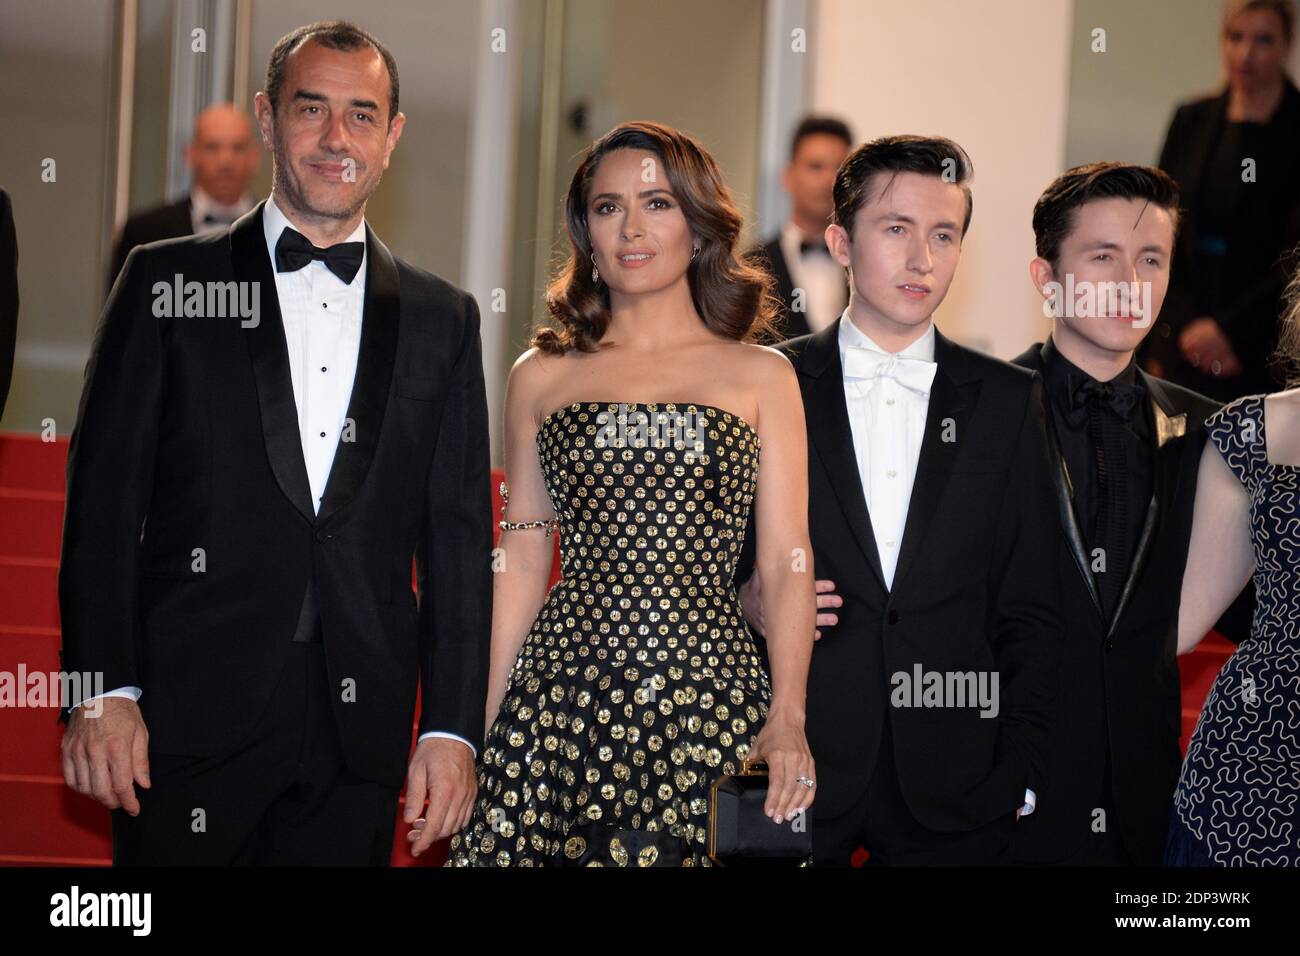 Mateo Garrone, Salma Hayek, Christian Lees and Jonah Lees arriving at the Palais des Festivals for the screening of the film Tale of Tales as part of the 68th Cannes Film Festival in Cannes, France on May 14, 2015. Photo by Nicolas Briquet/ABACAPRESS.COM Stock Photo